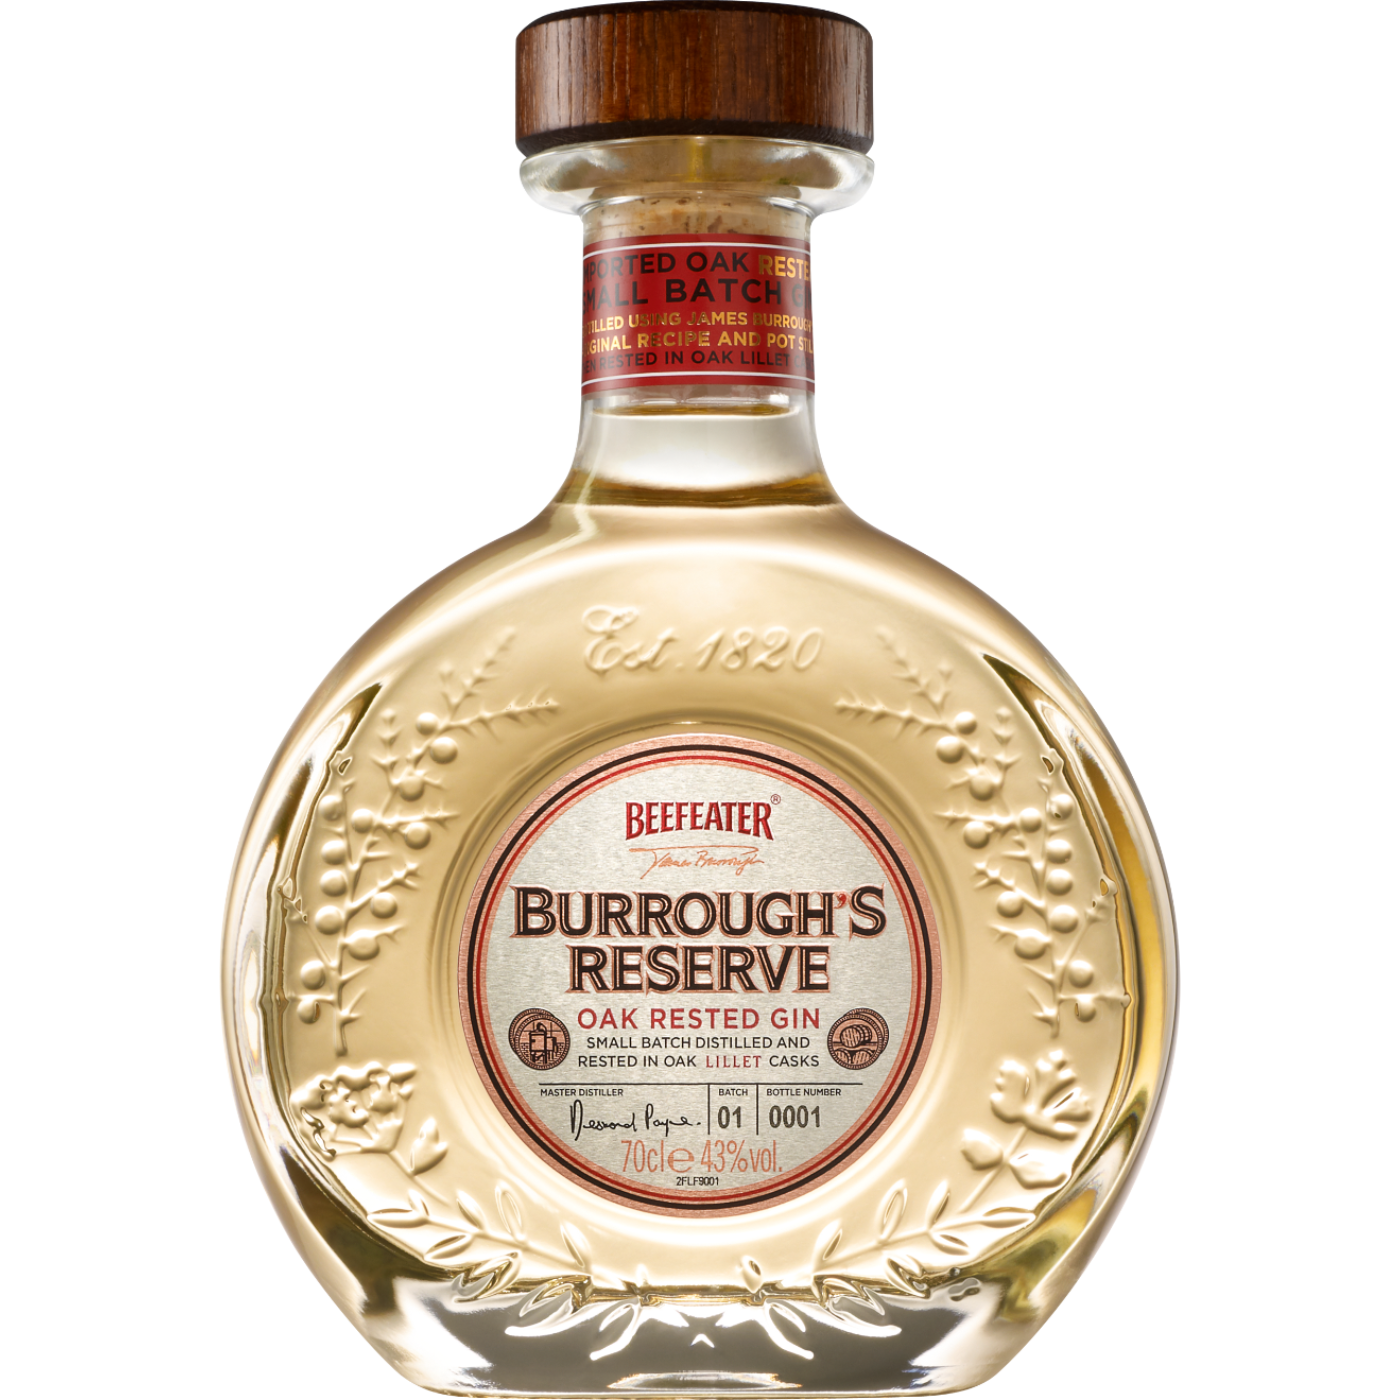 BEEFEATER BURROUGH